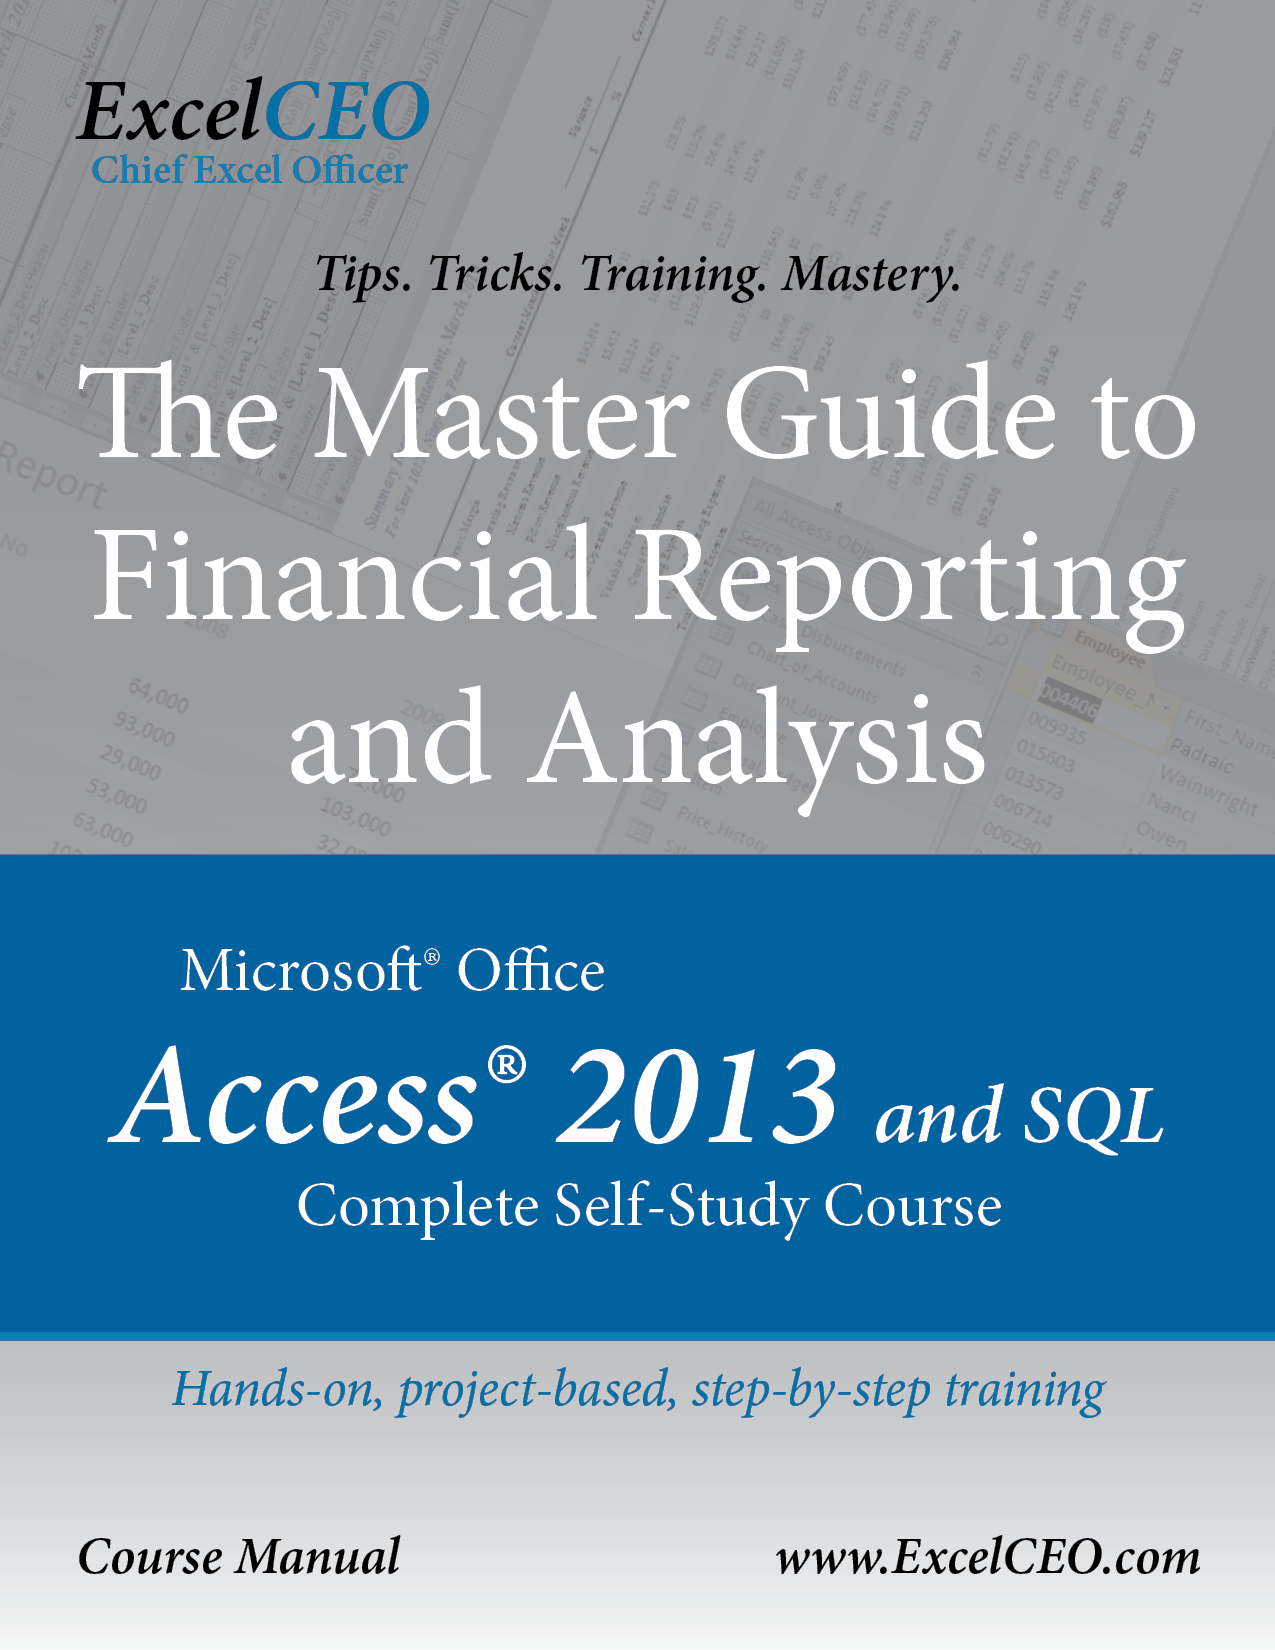 Access 2013 and SQL Manual Cover and Description Link